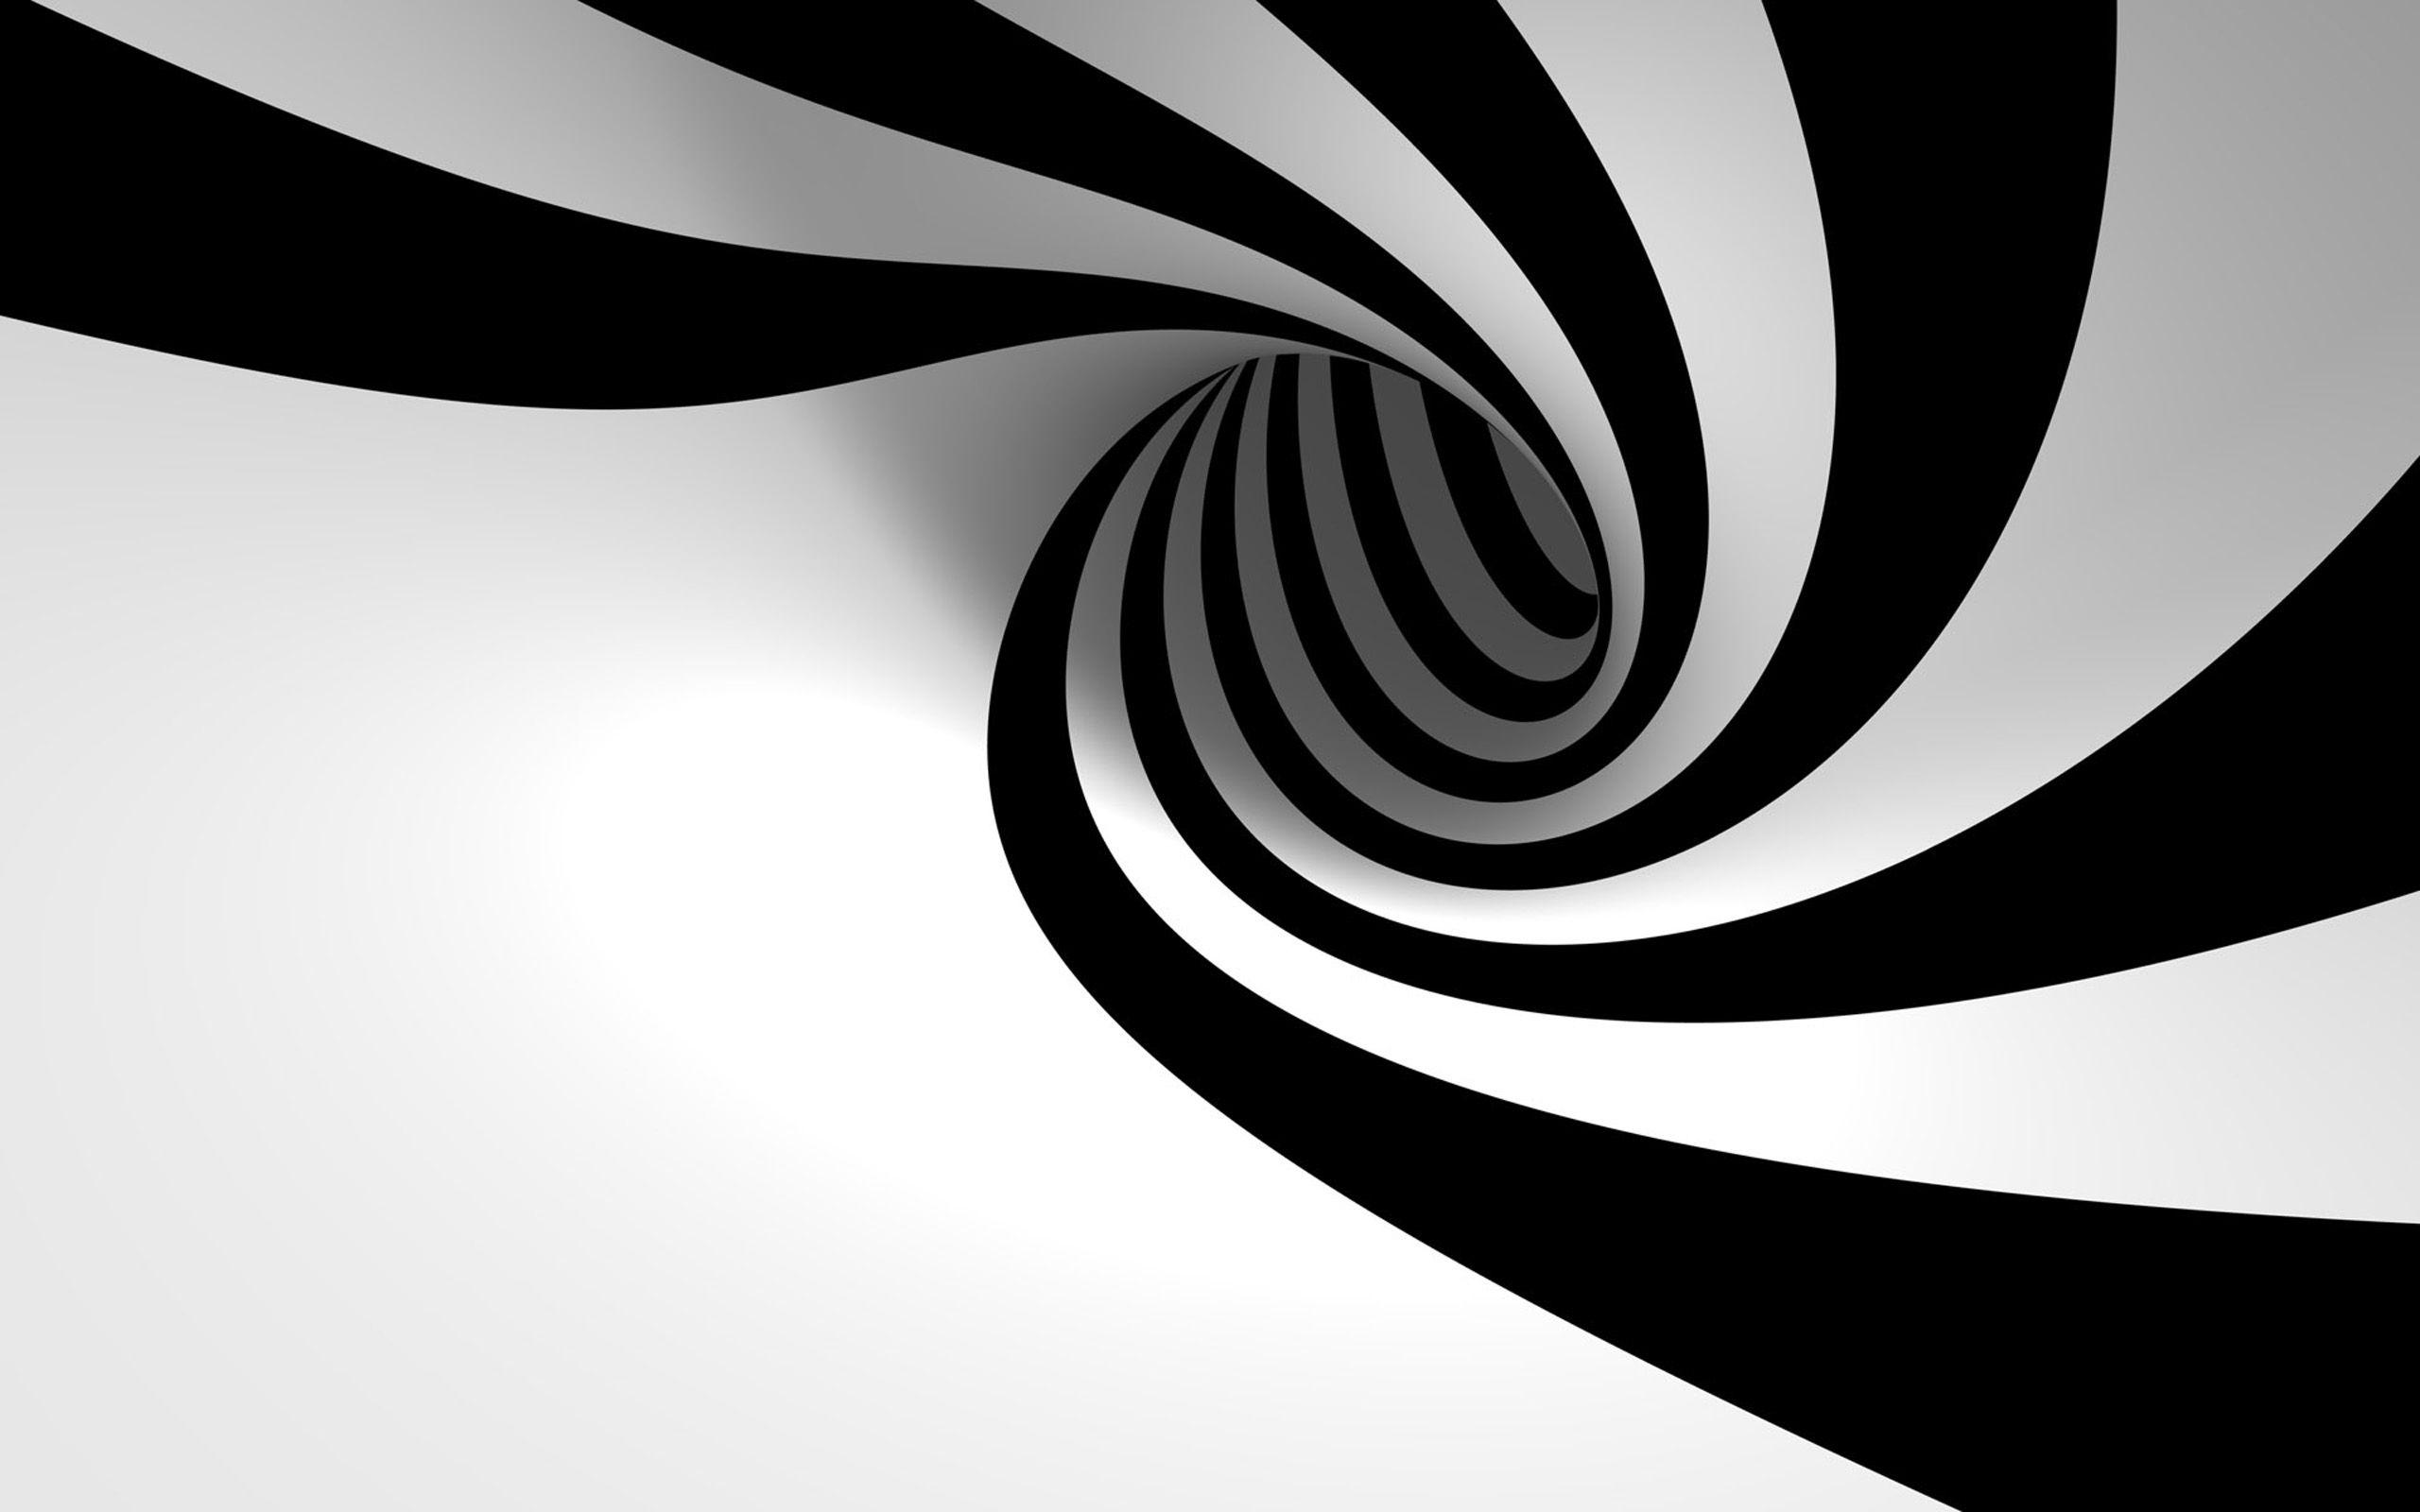 Black and White Spiral Logo - Free Black And White, Download Free Clip Art, Free Clip Art on ...